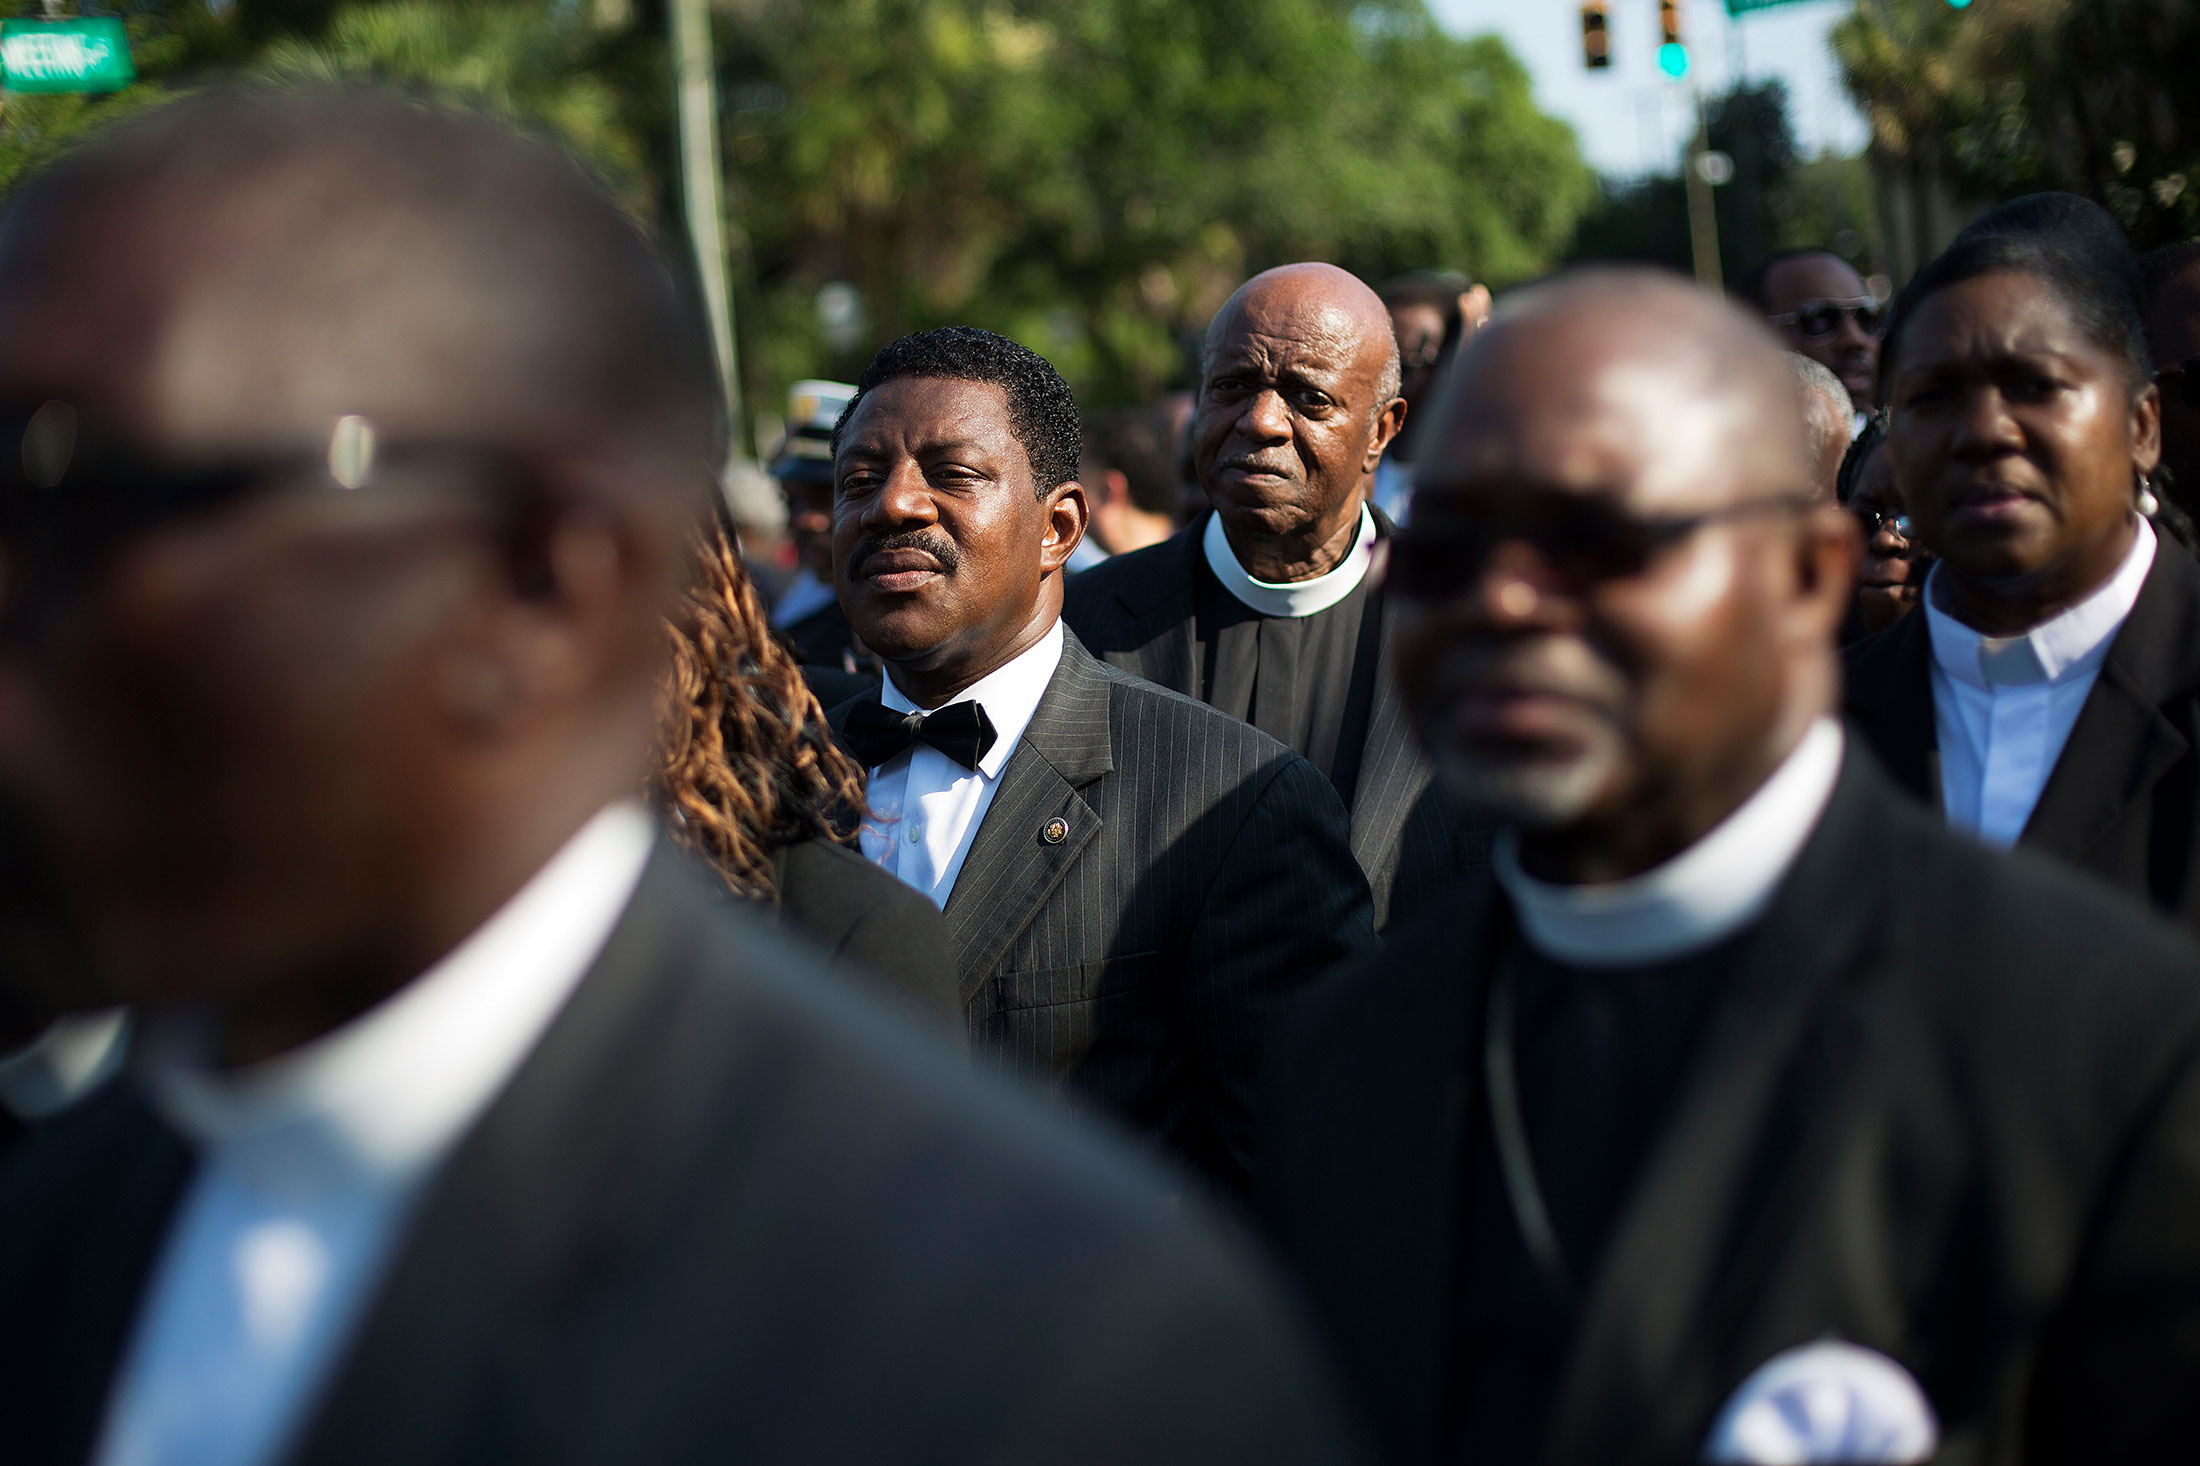 Clergy members wait to enter the funeral service for Sen. Clementa Pinckney, Friday, June 26, 2015, in Charleston, S.C. President Barack Obama will deliver the eulogy at Pinckney's funeral at a college arena near the Emanuel AME Church, the scene of last week's shooting.
